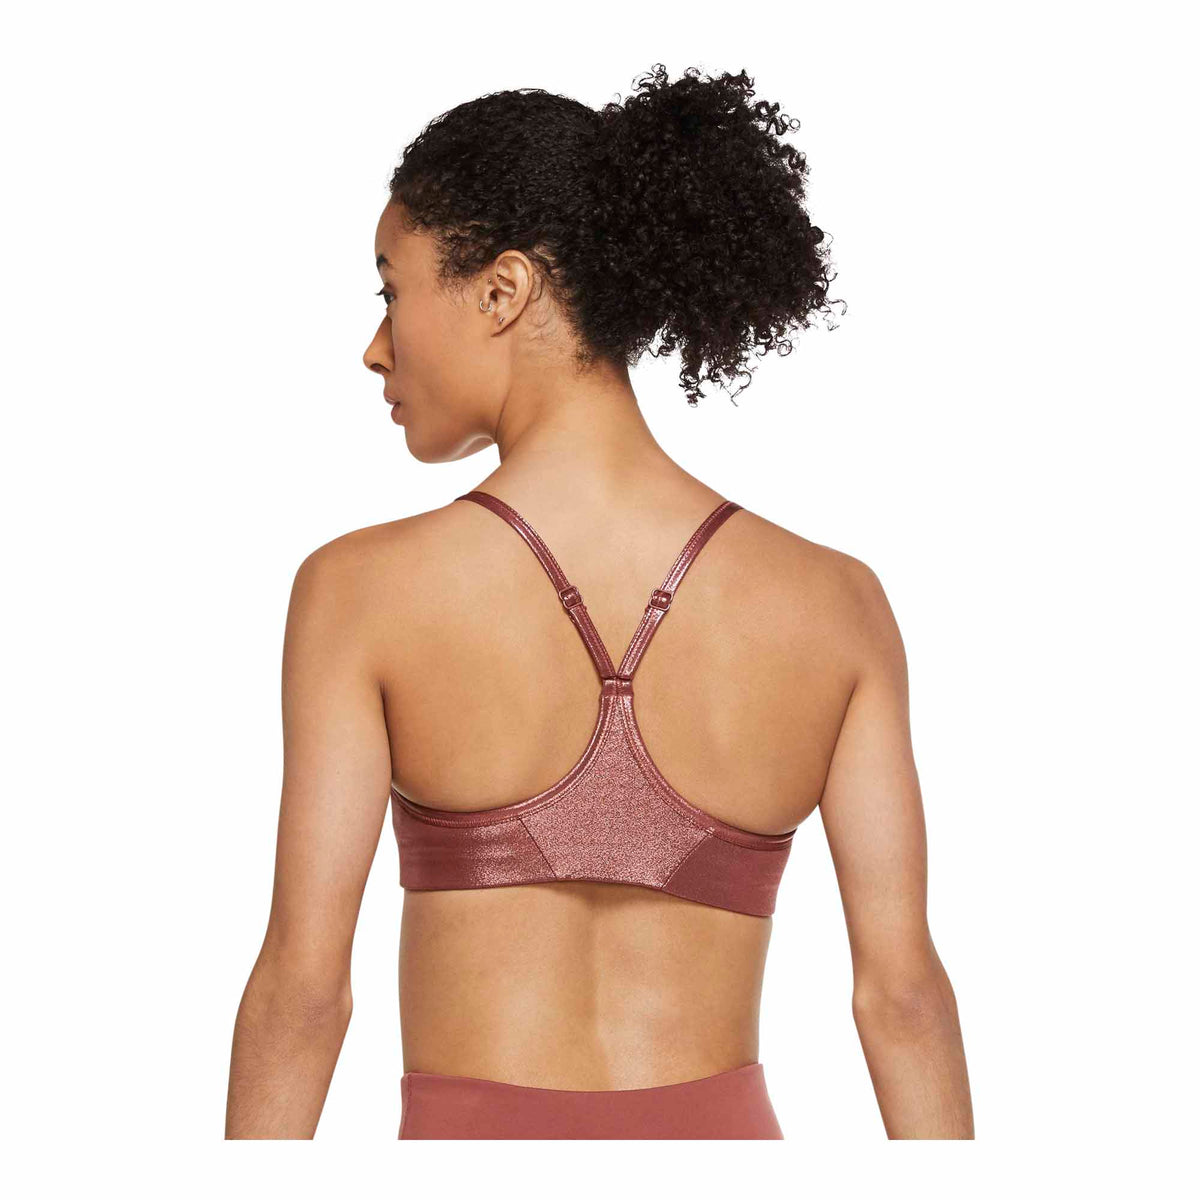 Women's Nike XLARGE Indy Icon Clash Pink Strappy Sports Bra Light Support